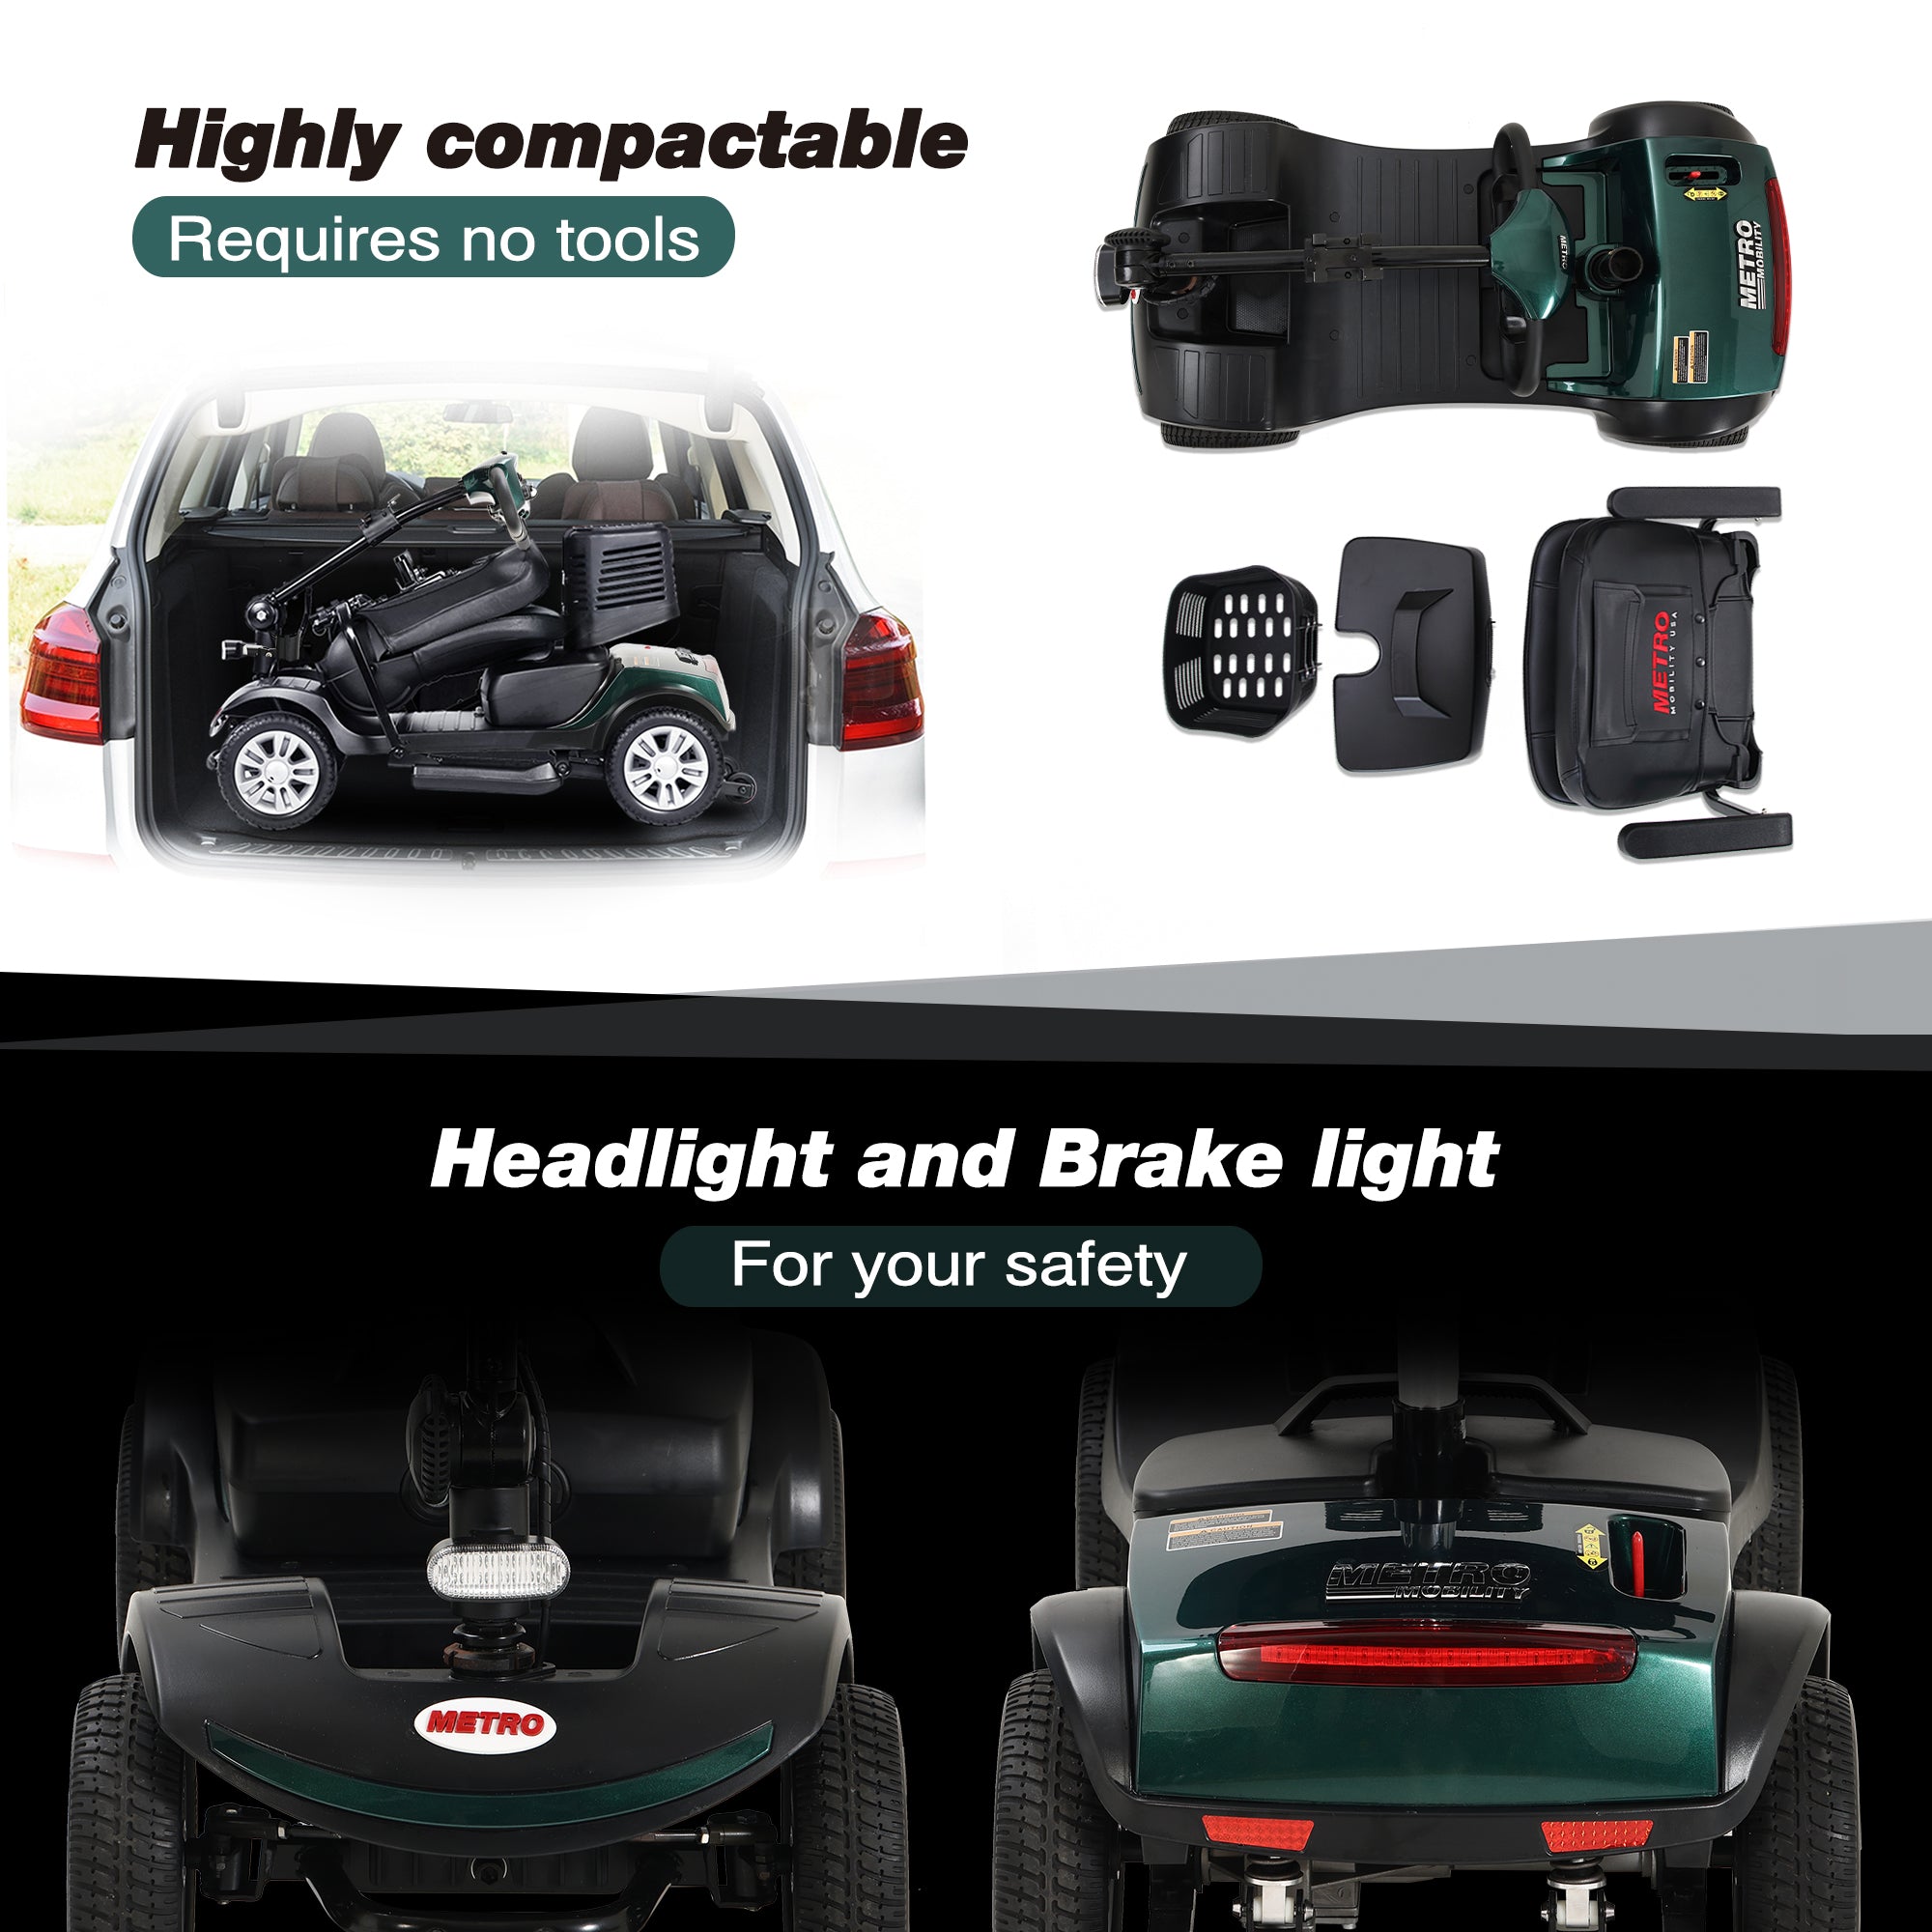 Folding 4 Wheels Compact Travel Mobility Scooter with Led Light 300W, Electric Powered Wheelchair Device Motor for Adult Elderly -300lbs, Power Extended Battery with Charger and Basket, Emerald